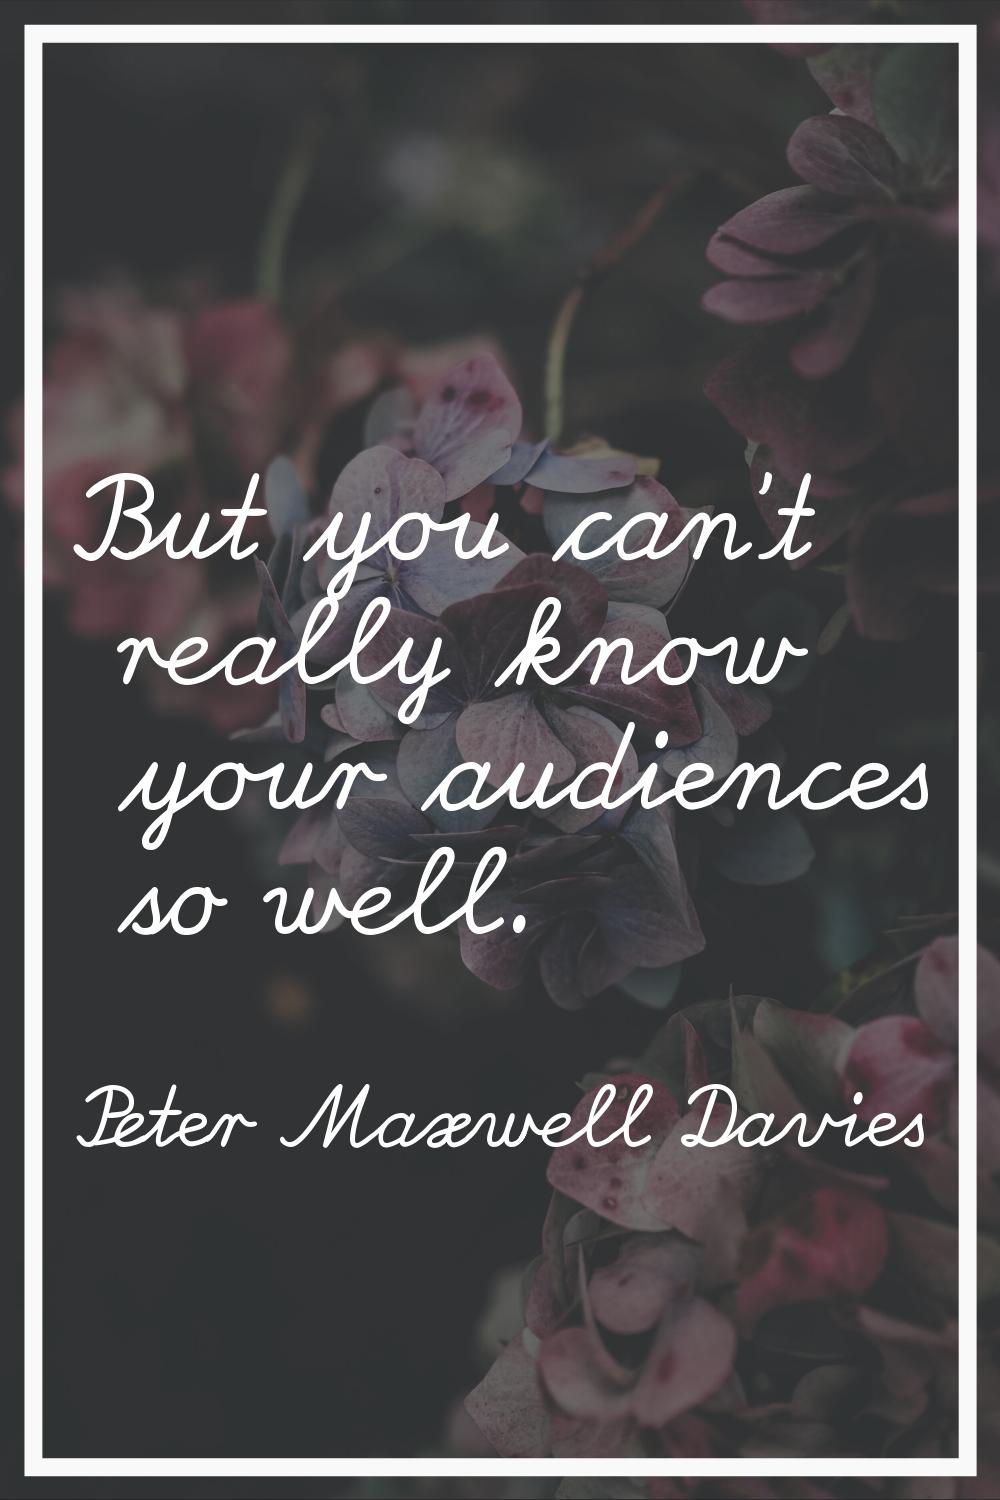 But you can't really know your audiences so well.